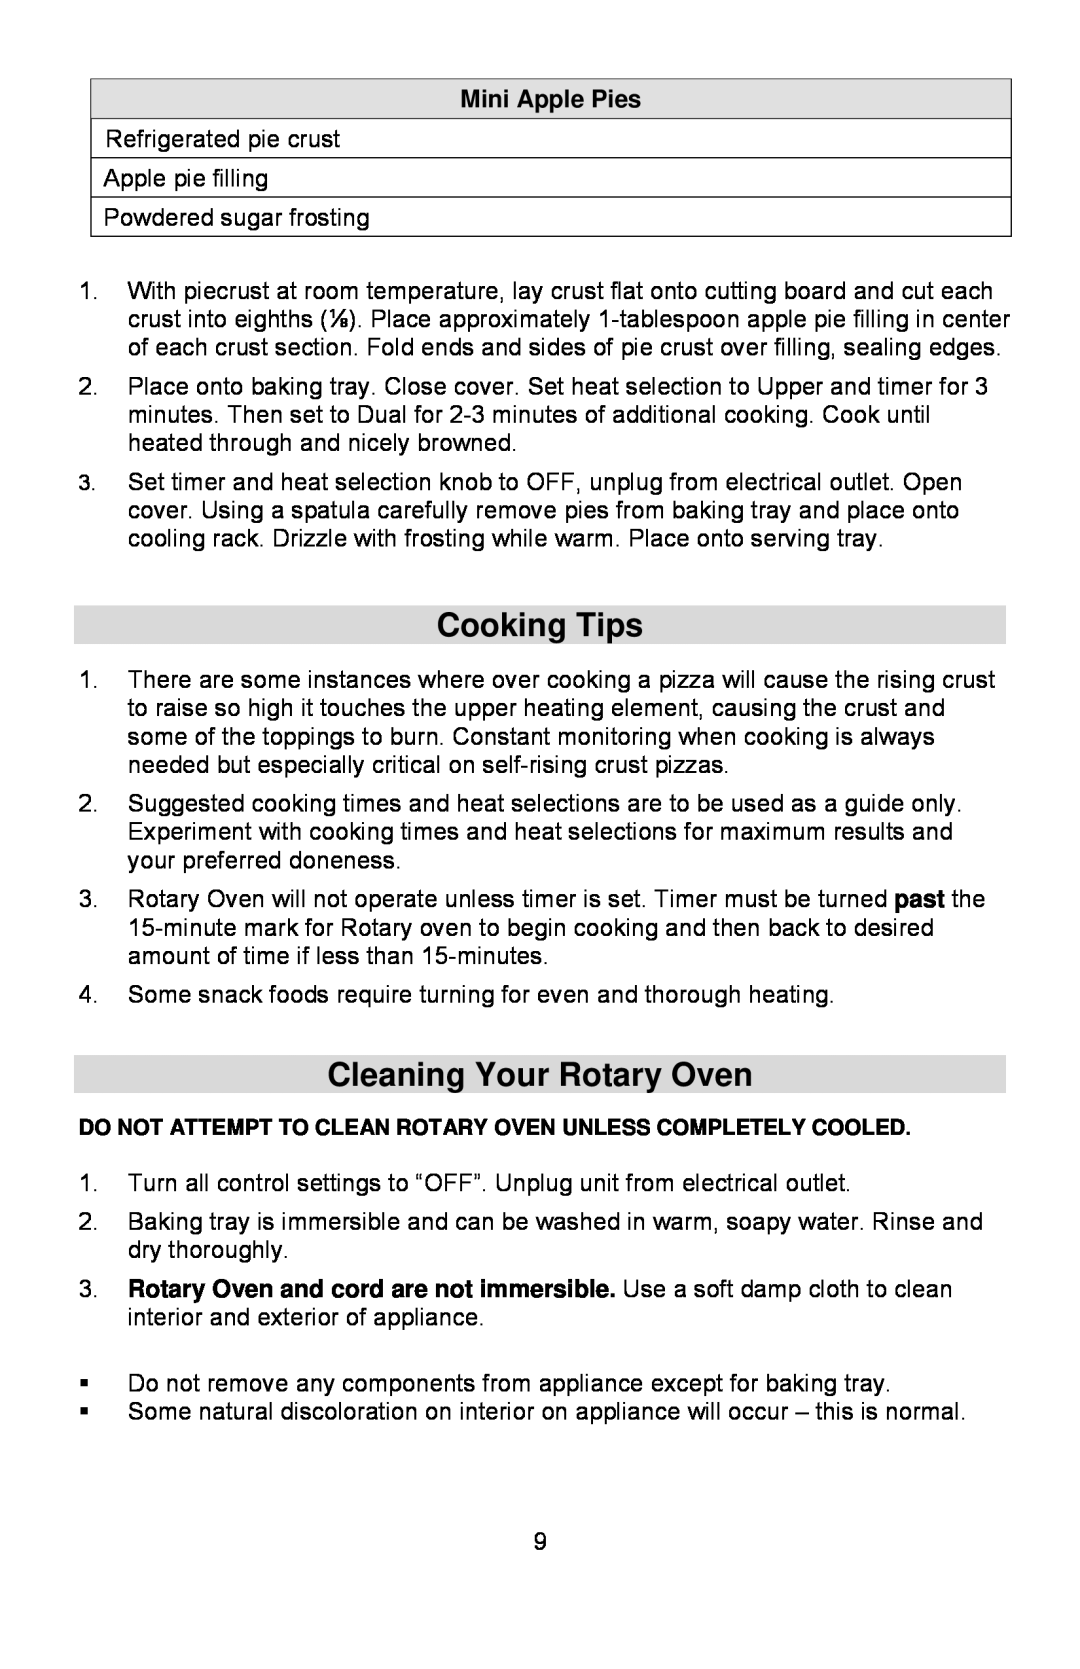 West Bend Rotisserie Oven instruction manual Cooking Tips, Cleaning Your Rotary Oven, Mini Apple Pies 